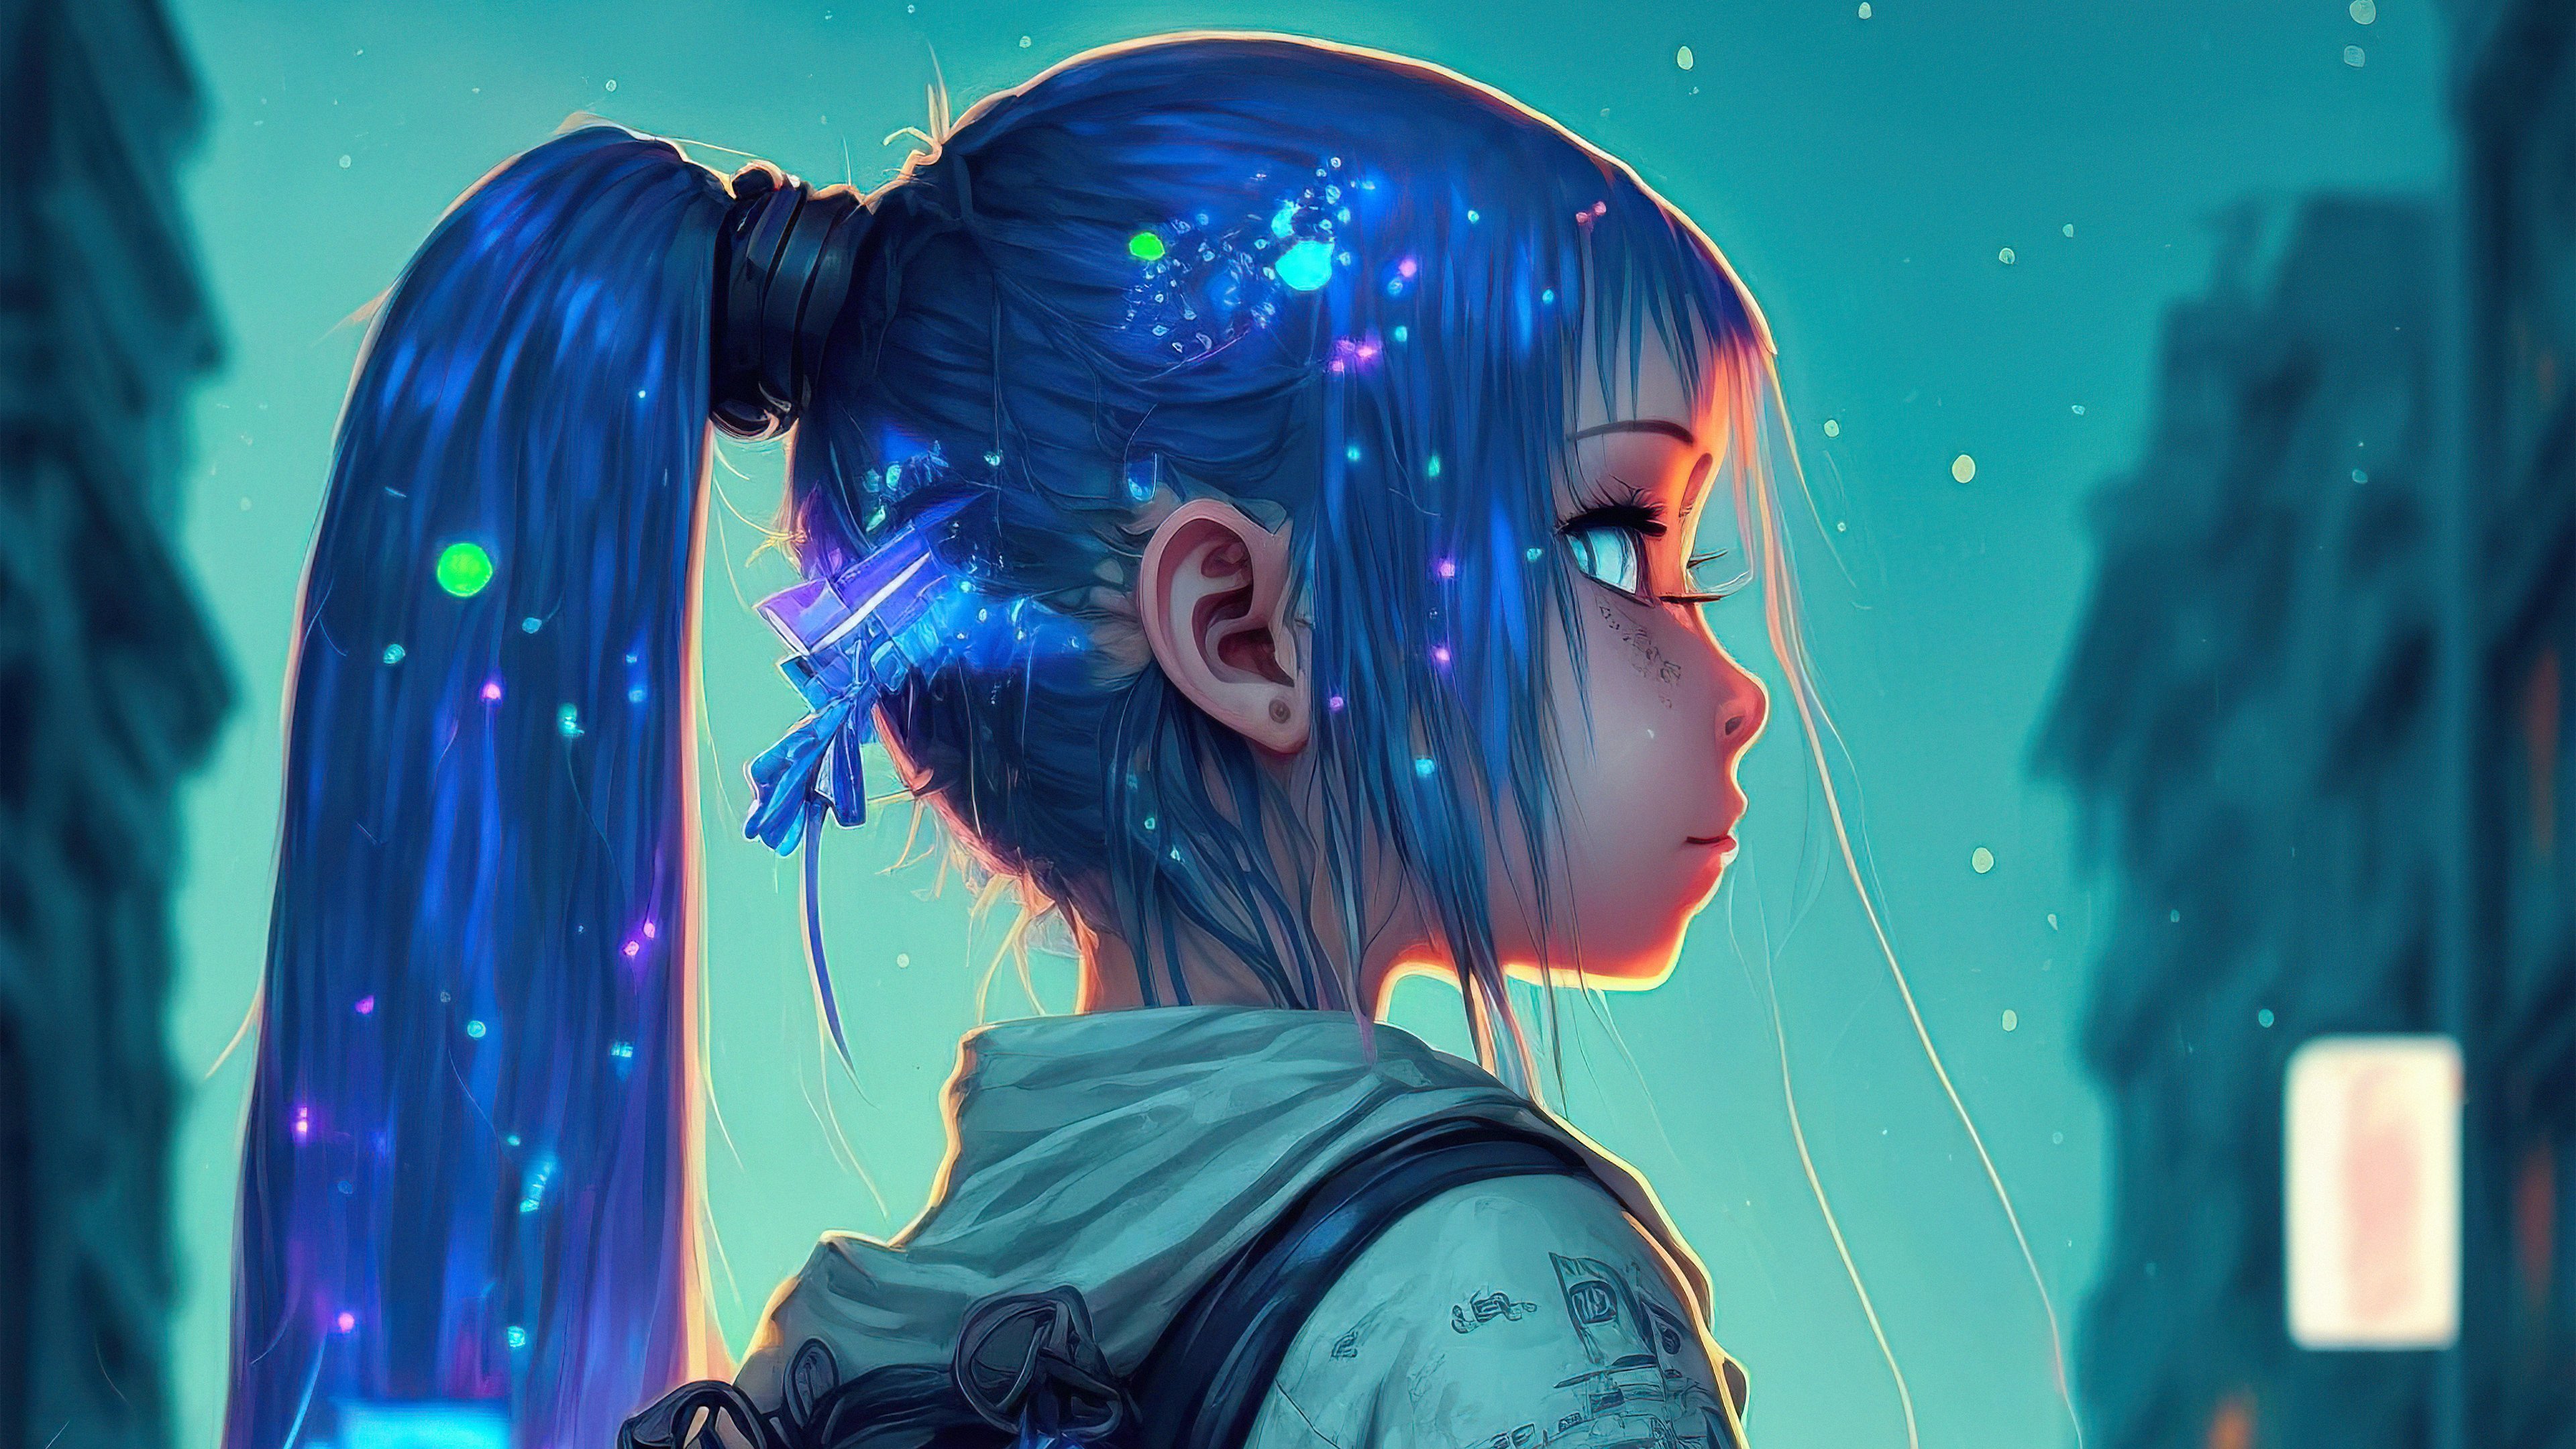 Wallpaper Intuition Girl with blue hair and lights